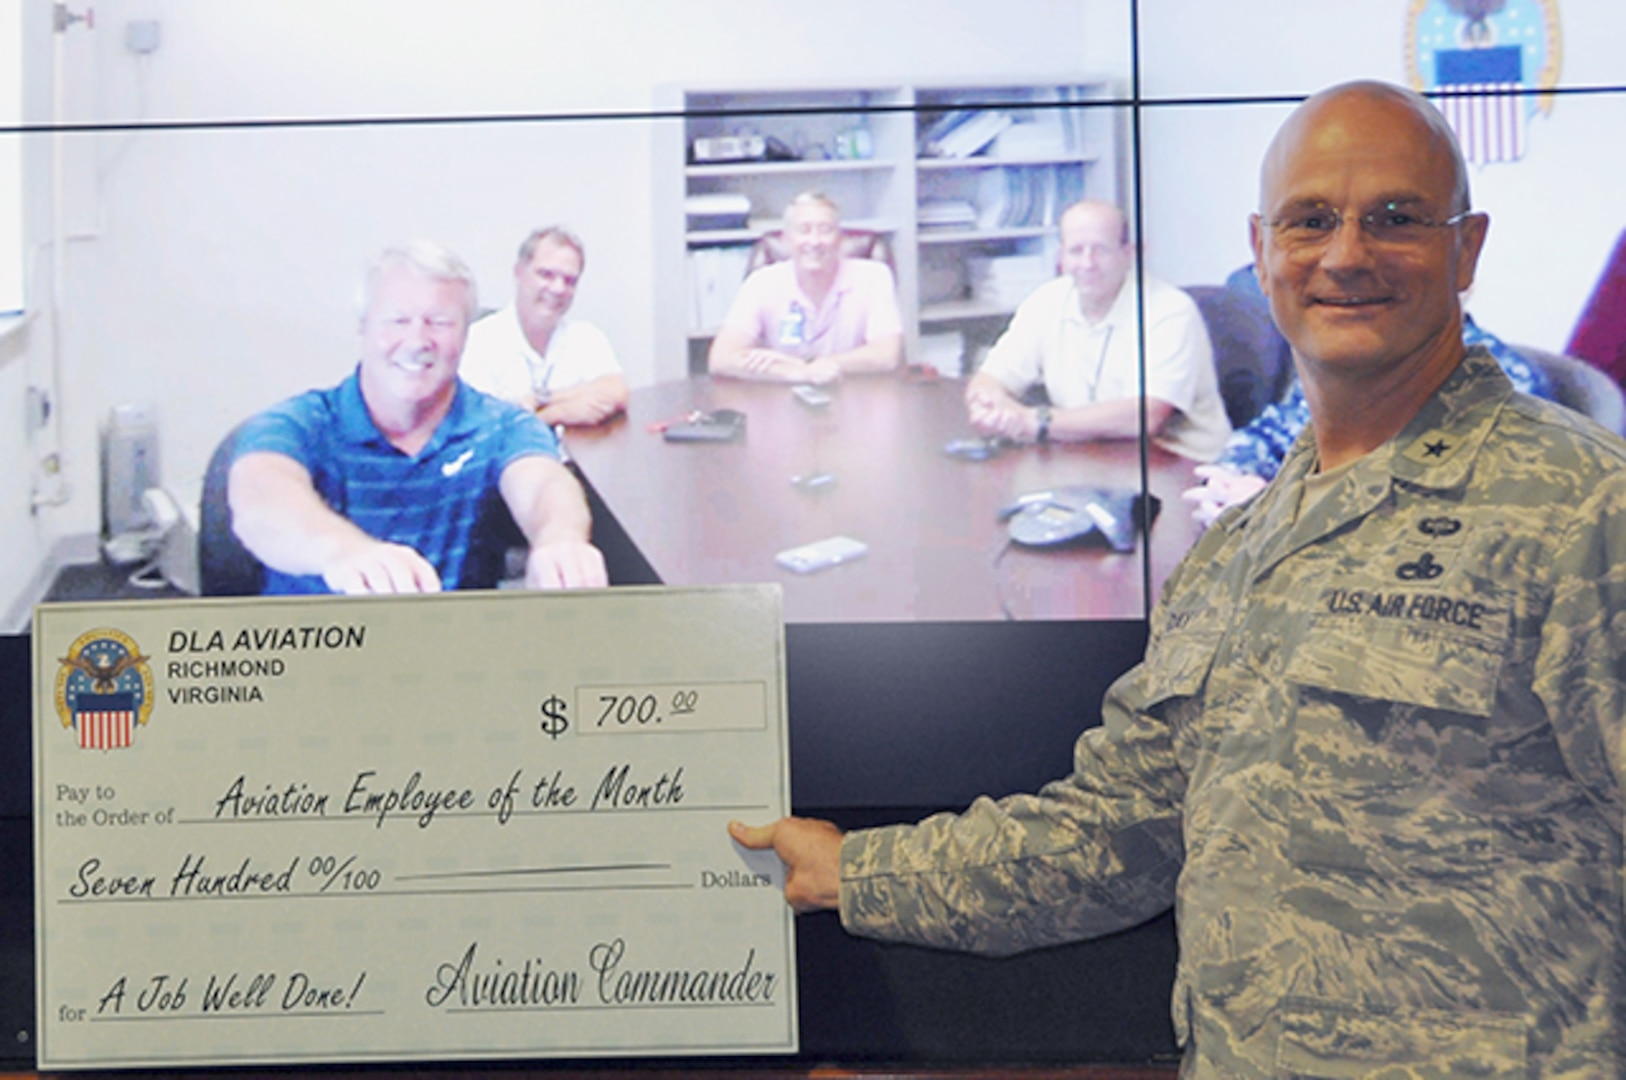 Richard McGrory, a materiel planner with Defense Logistics Agency Aviation at Jacksonville, Florida, receives a check from Defense Logistics Agency Aviation Commander Air Force Brig. Gen. Allan Day in recognition of being named the April Employee of the Month during a June 8, 2016 video ceremony. 